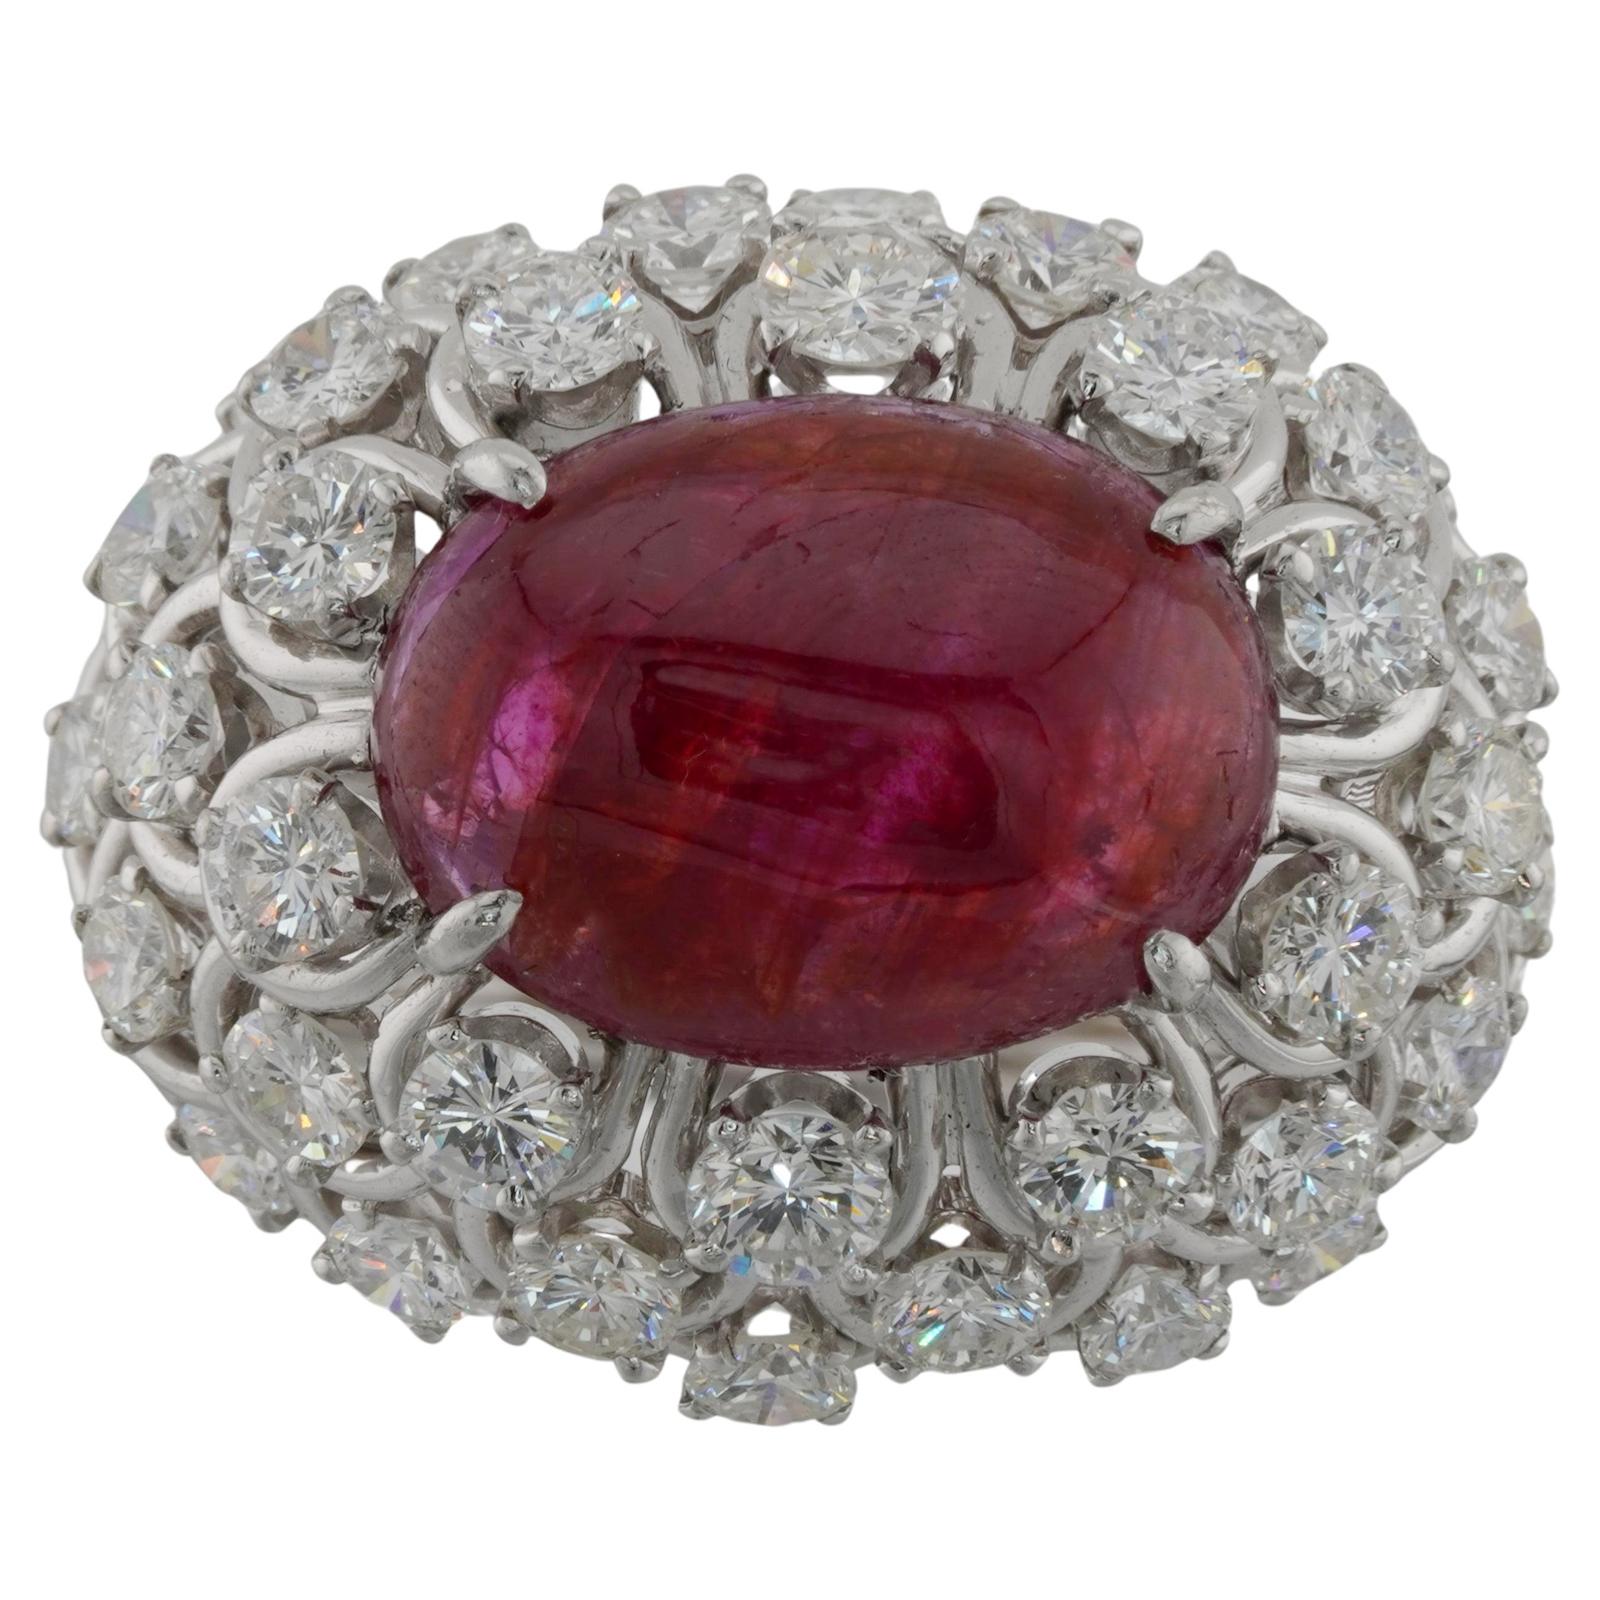 This captivating ring from David Webb features an open-design dome crown prong-set with an oval 11.0mm x 15.0mm cabochon ruby and surrounded by 36 sparkling round diamonds. Made in fine platinum and completed by an adjustable spring for sizing the